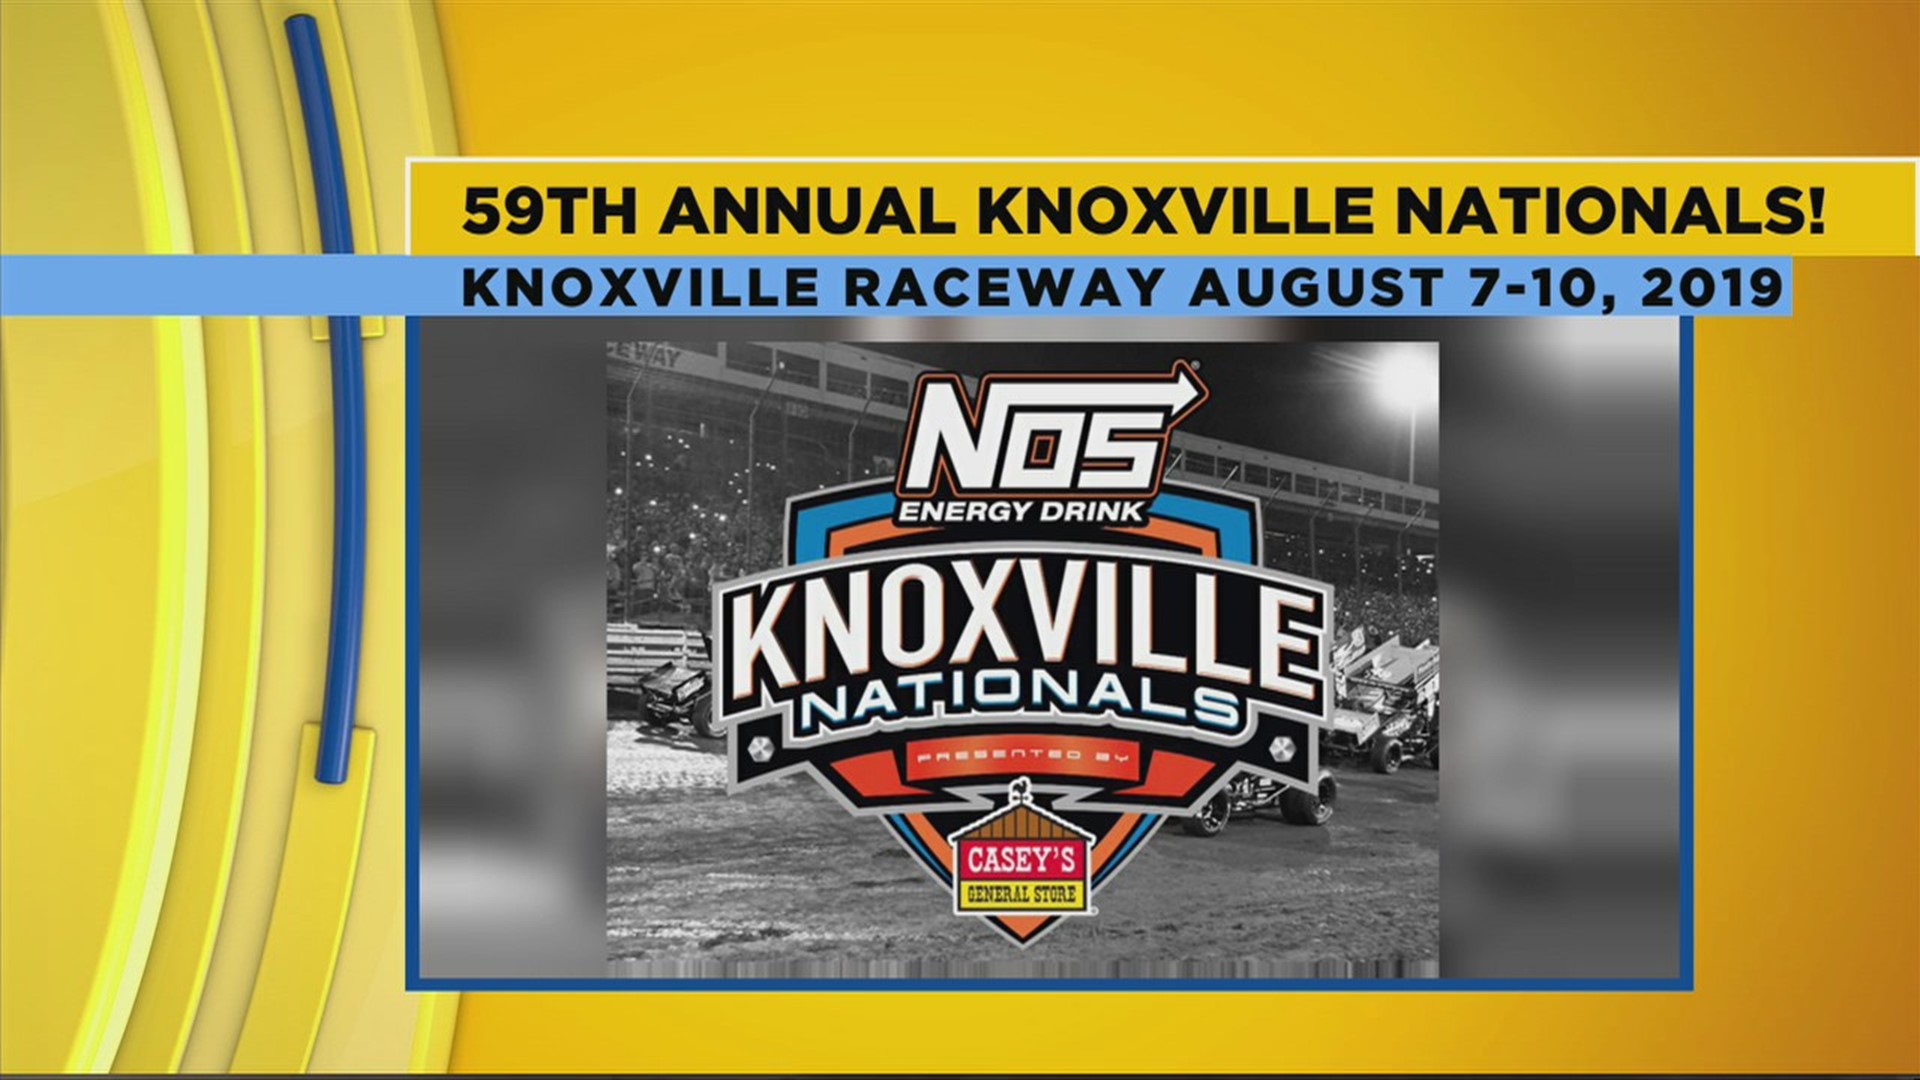 Knoxville Raceway - The Knoxville Nationals